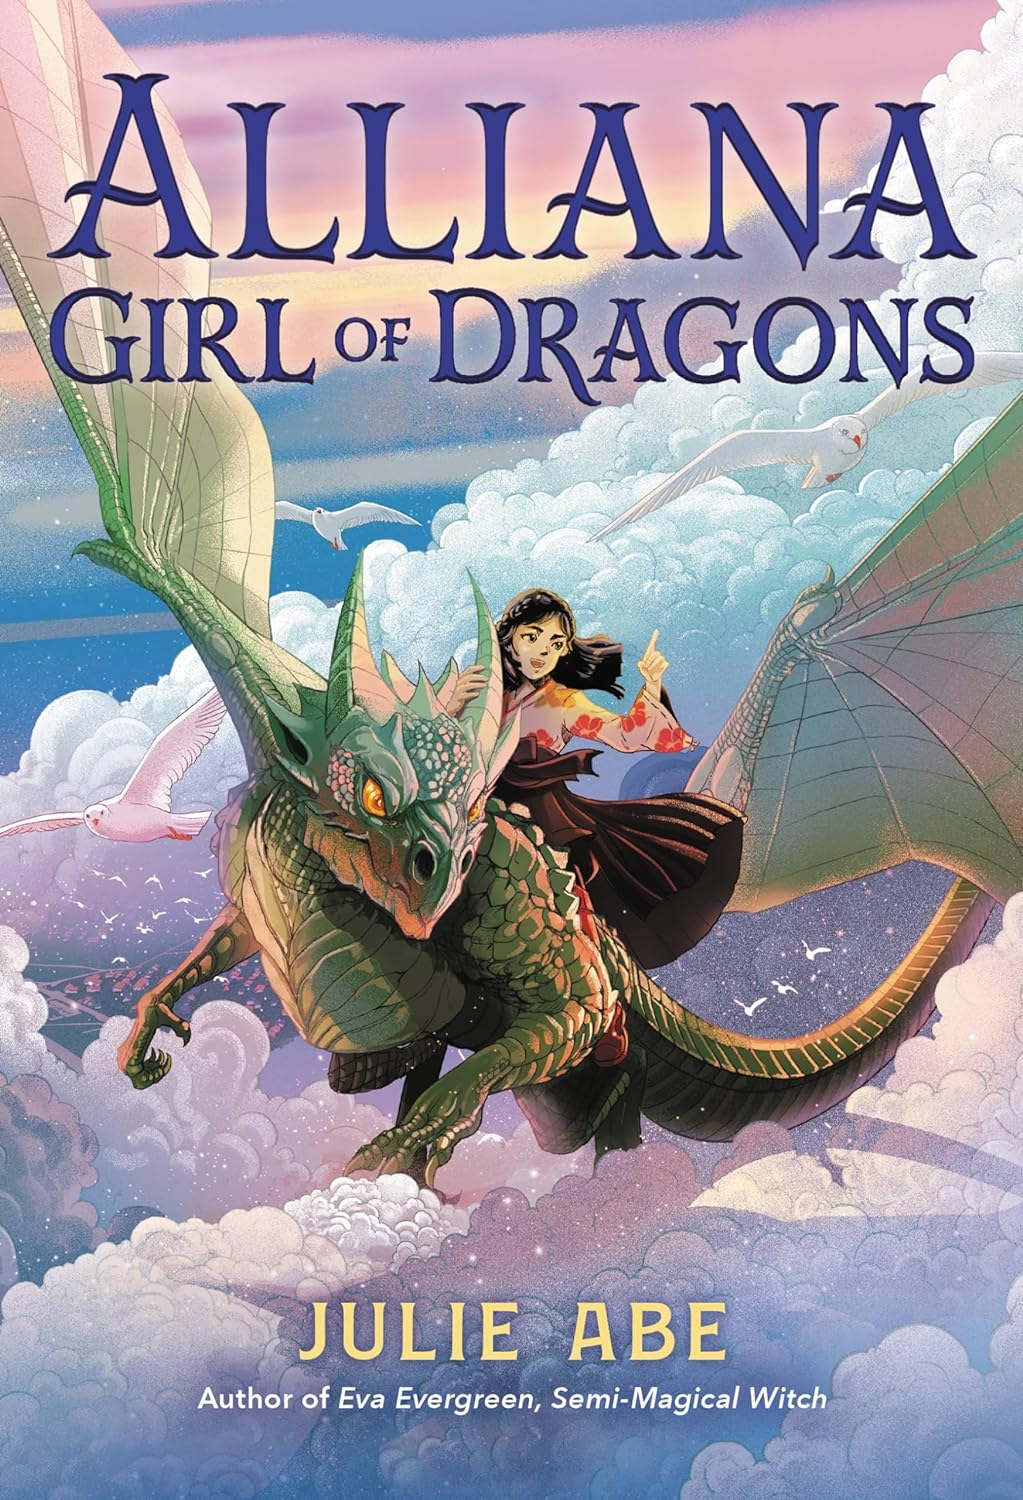 Cover of Alliana, Girl of Dragons by Julie Abe